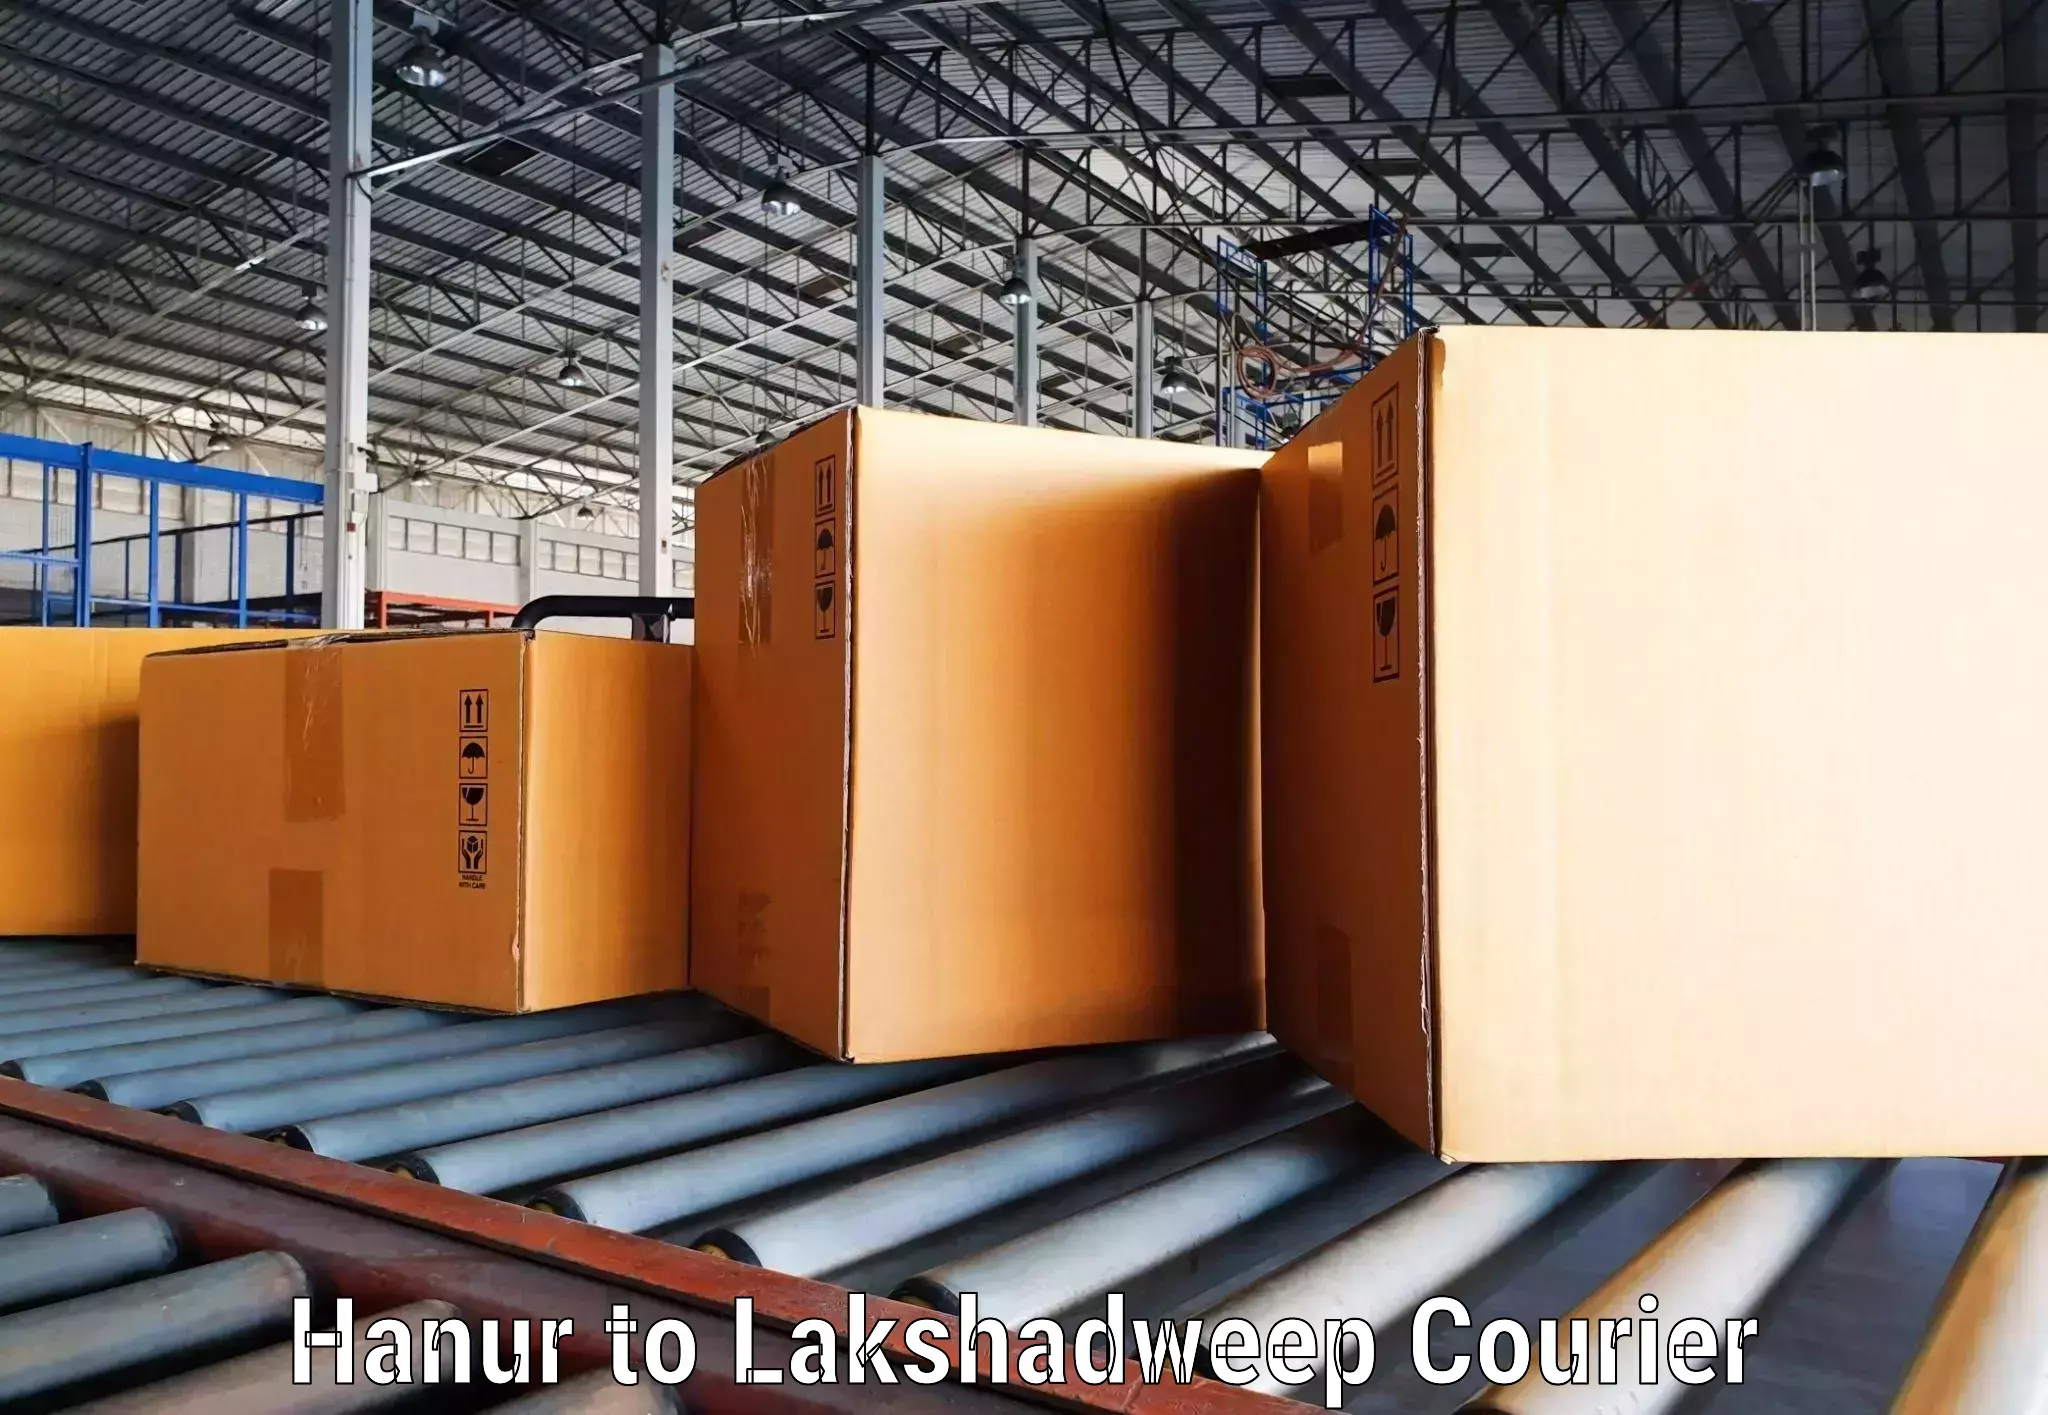 Courier service booking Hanur to Lakshadweep